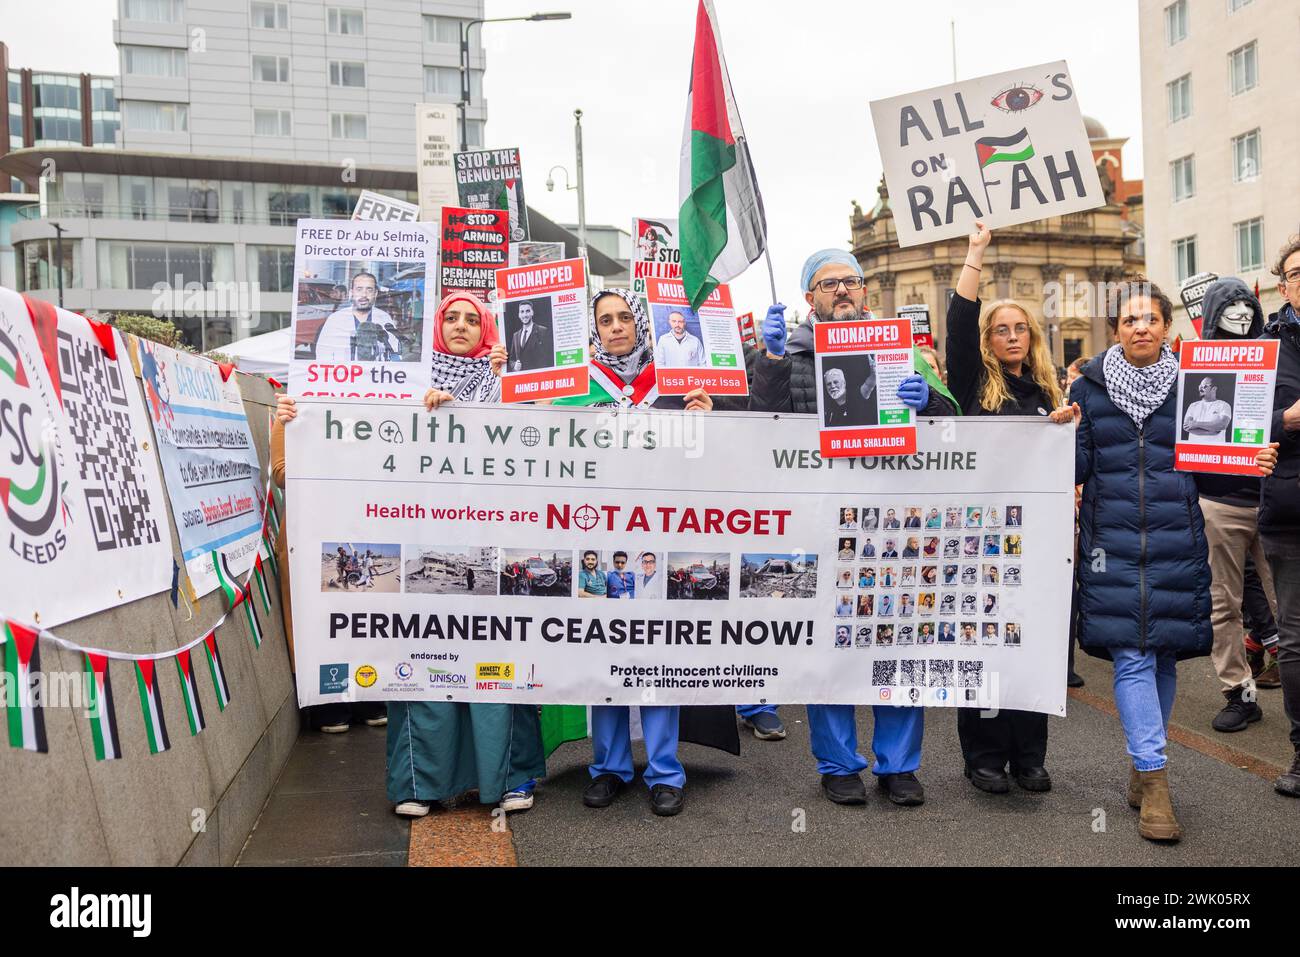 Leeds, UK. 17 FEB, 2024. Members of Health workers for palestine, including members wearing scrubs and gowns gather in city square as part of pro palestine demonstration. Credit Milo Chandler/Alamy Live News Stock Photo